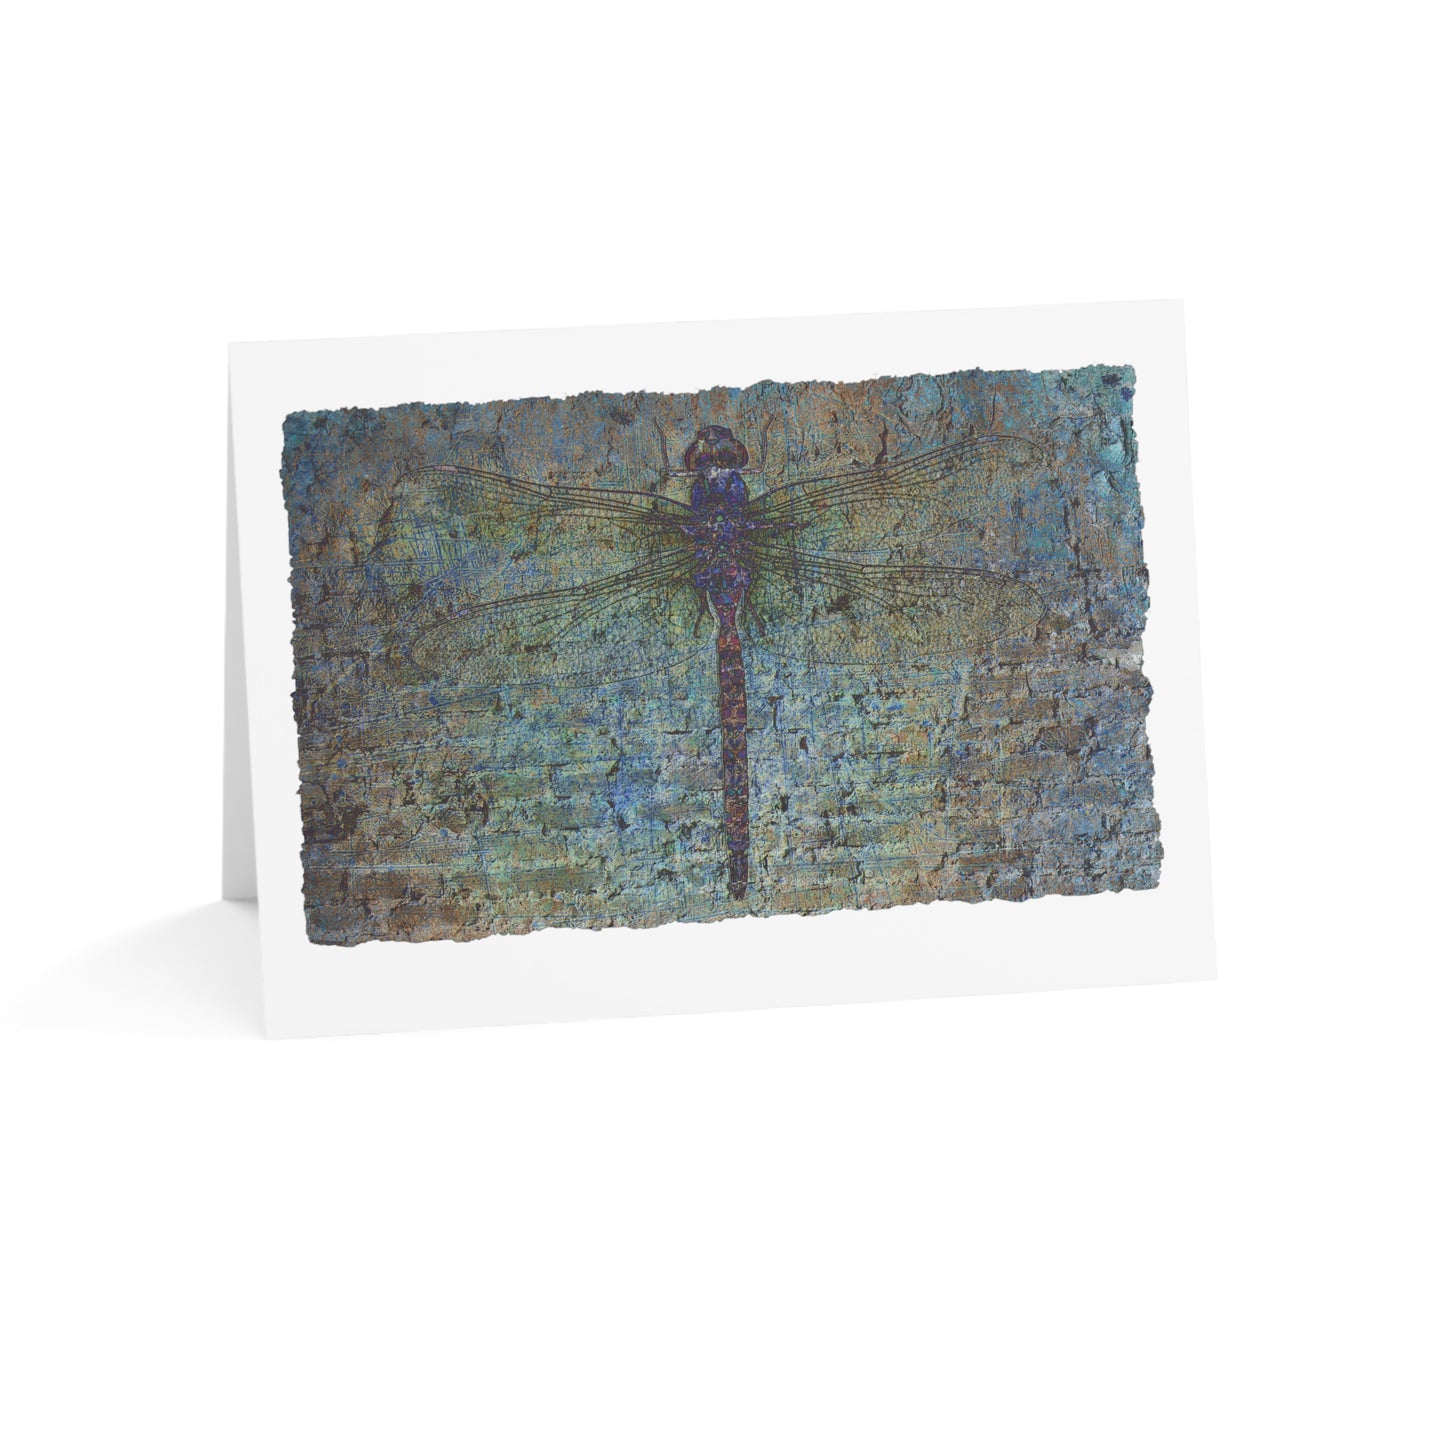 Dragonfly Print Greeting Cards Blue Dragonfly on Brick Stationery and Blank Cards side view